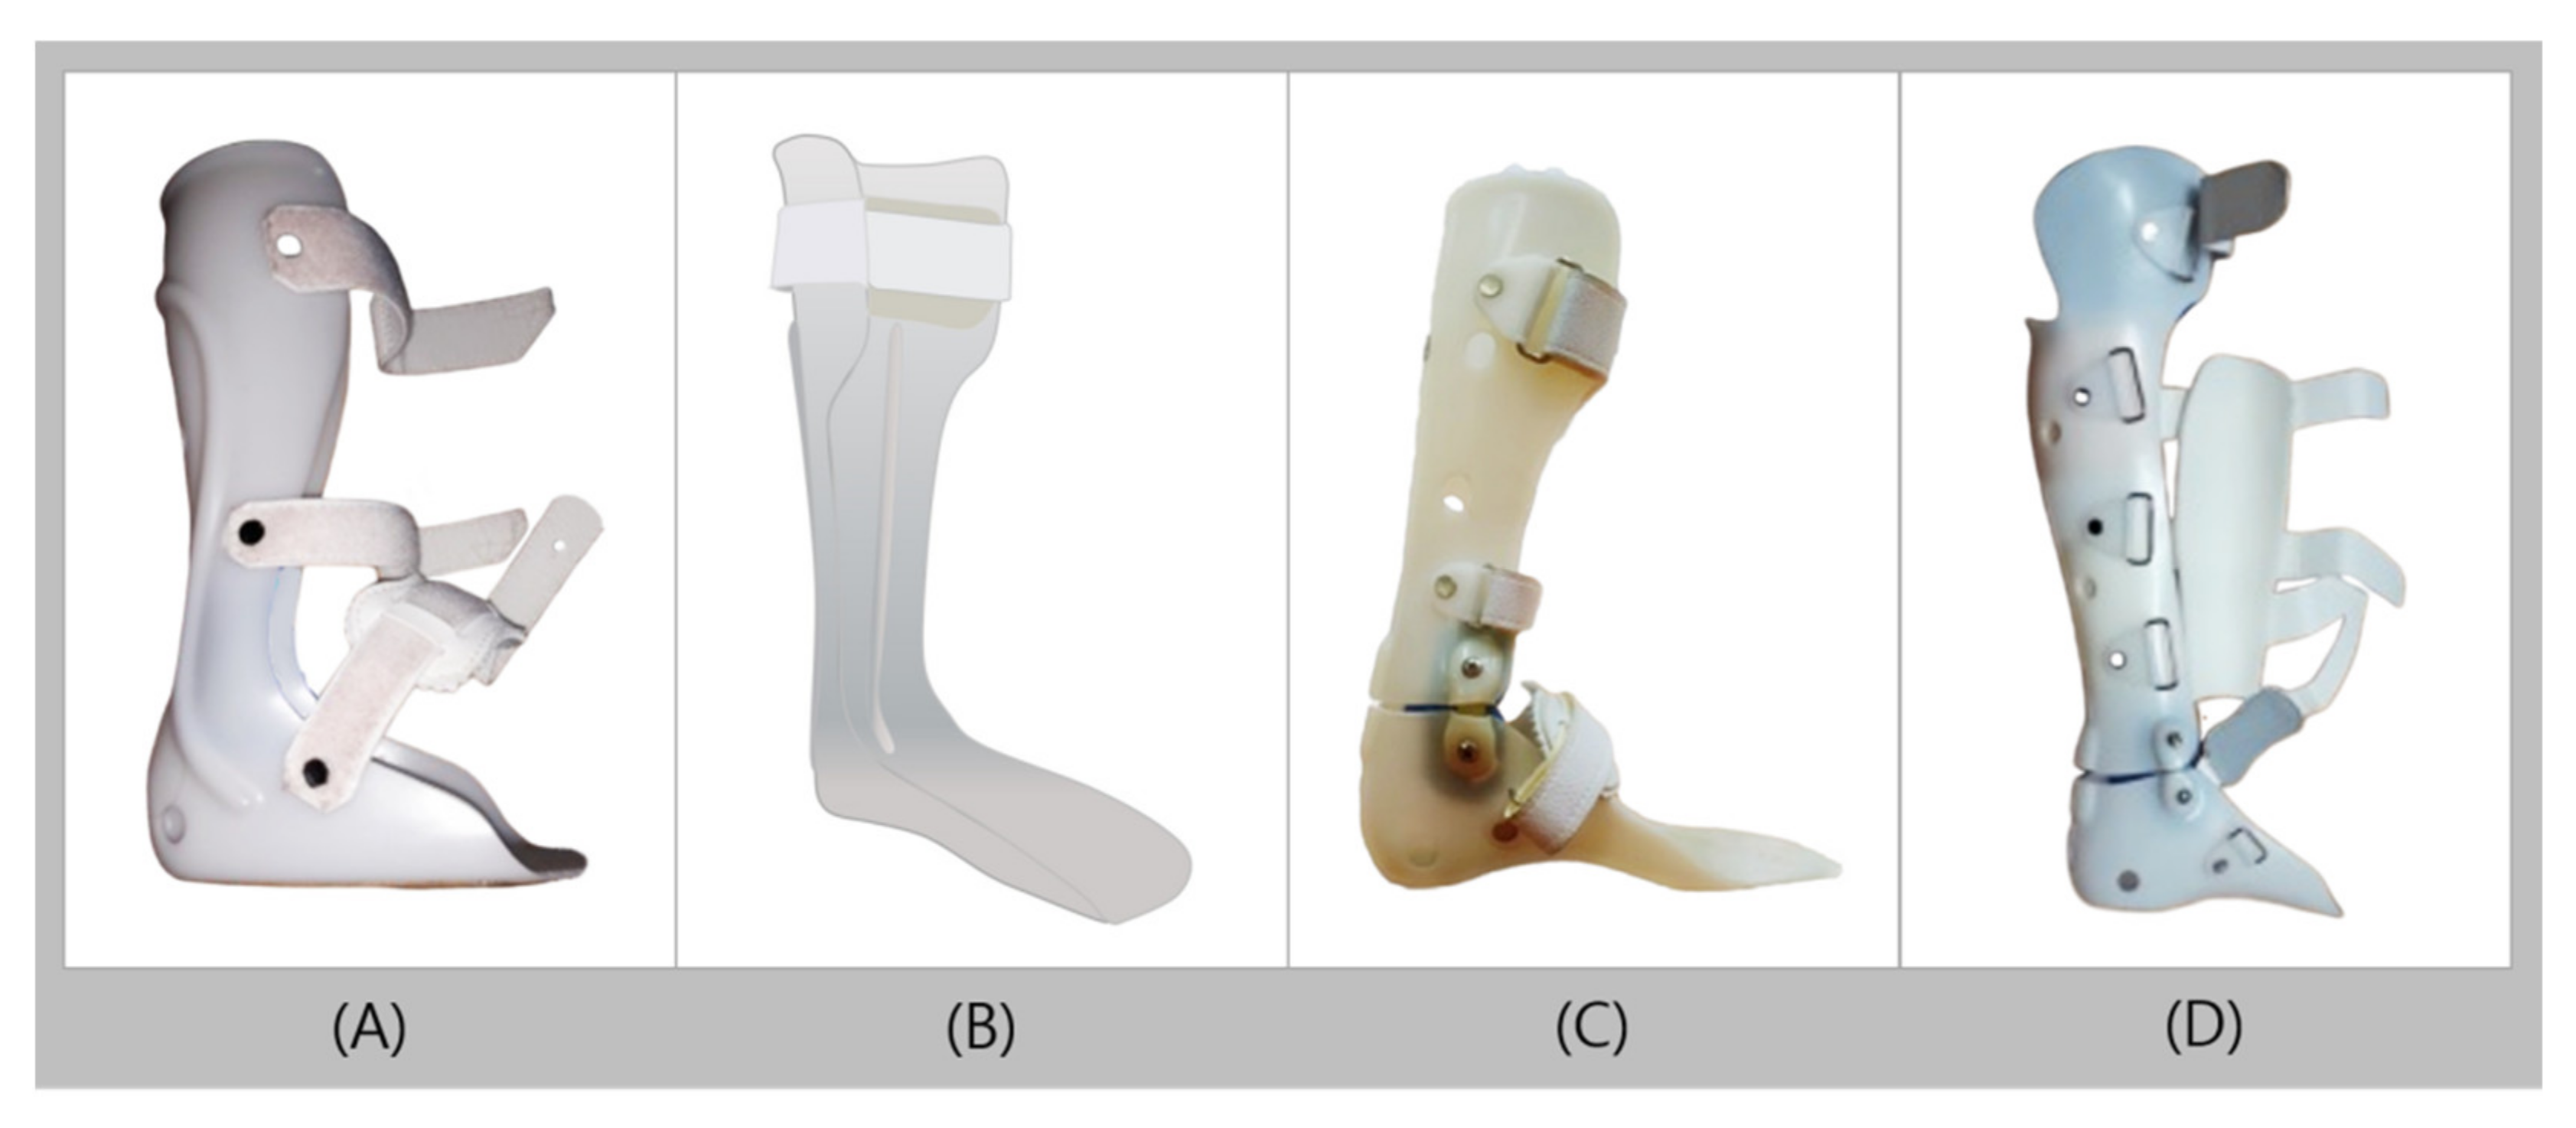 Push Natural Gait Ankle Foot Orthosis (AFO)